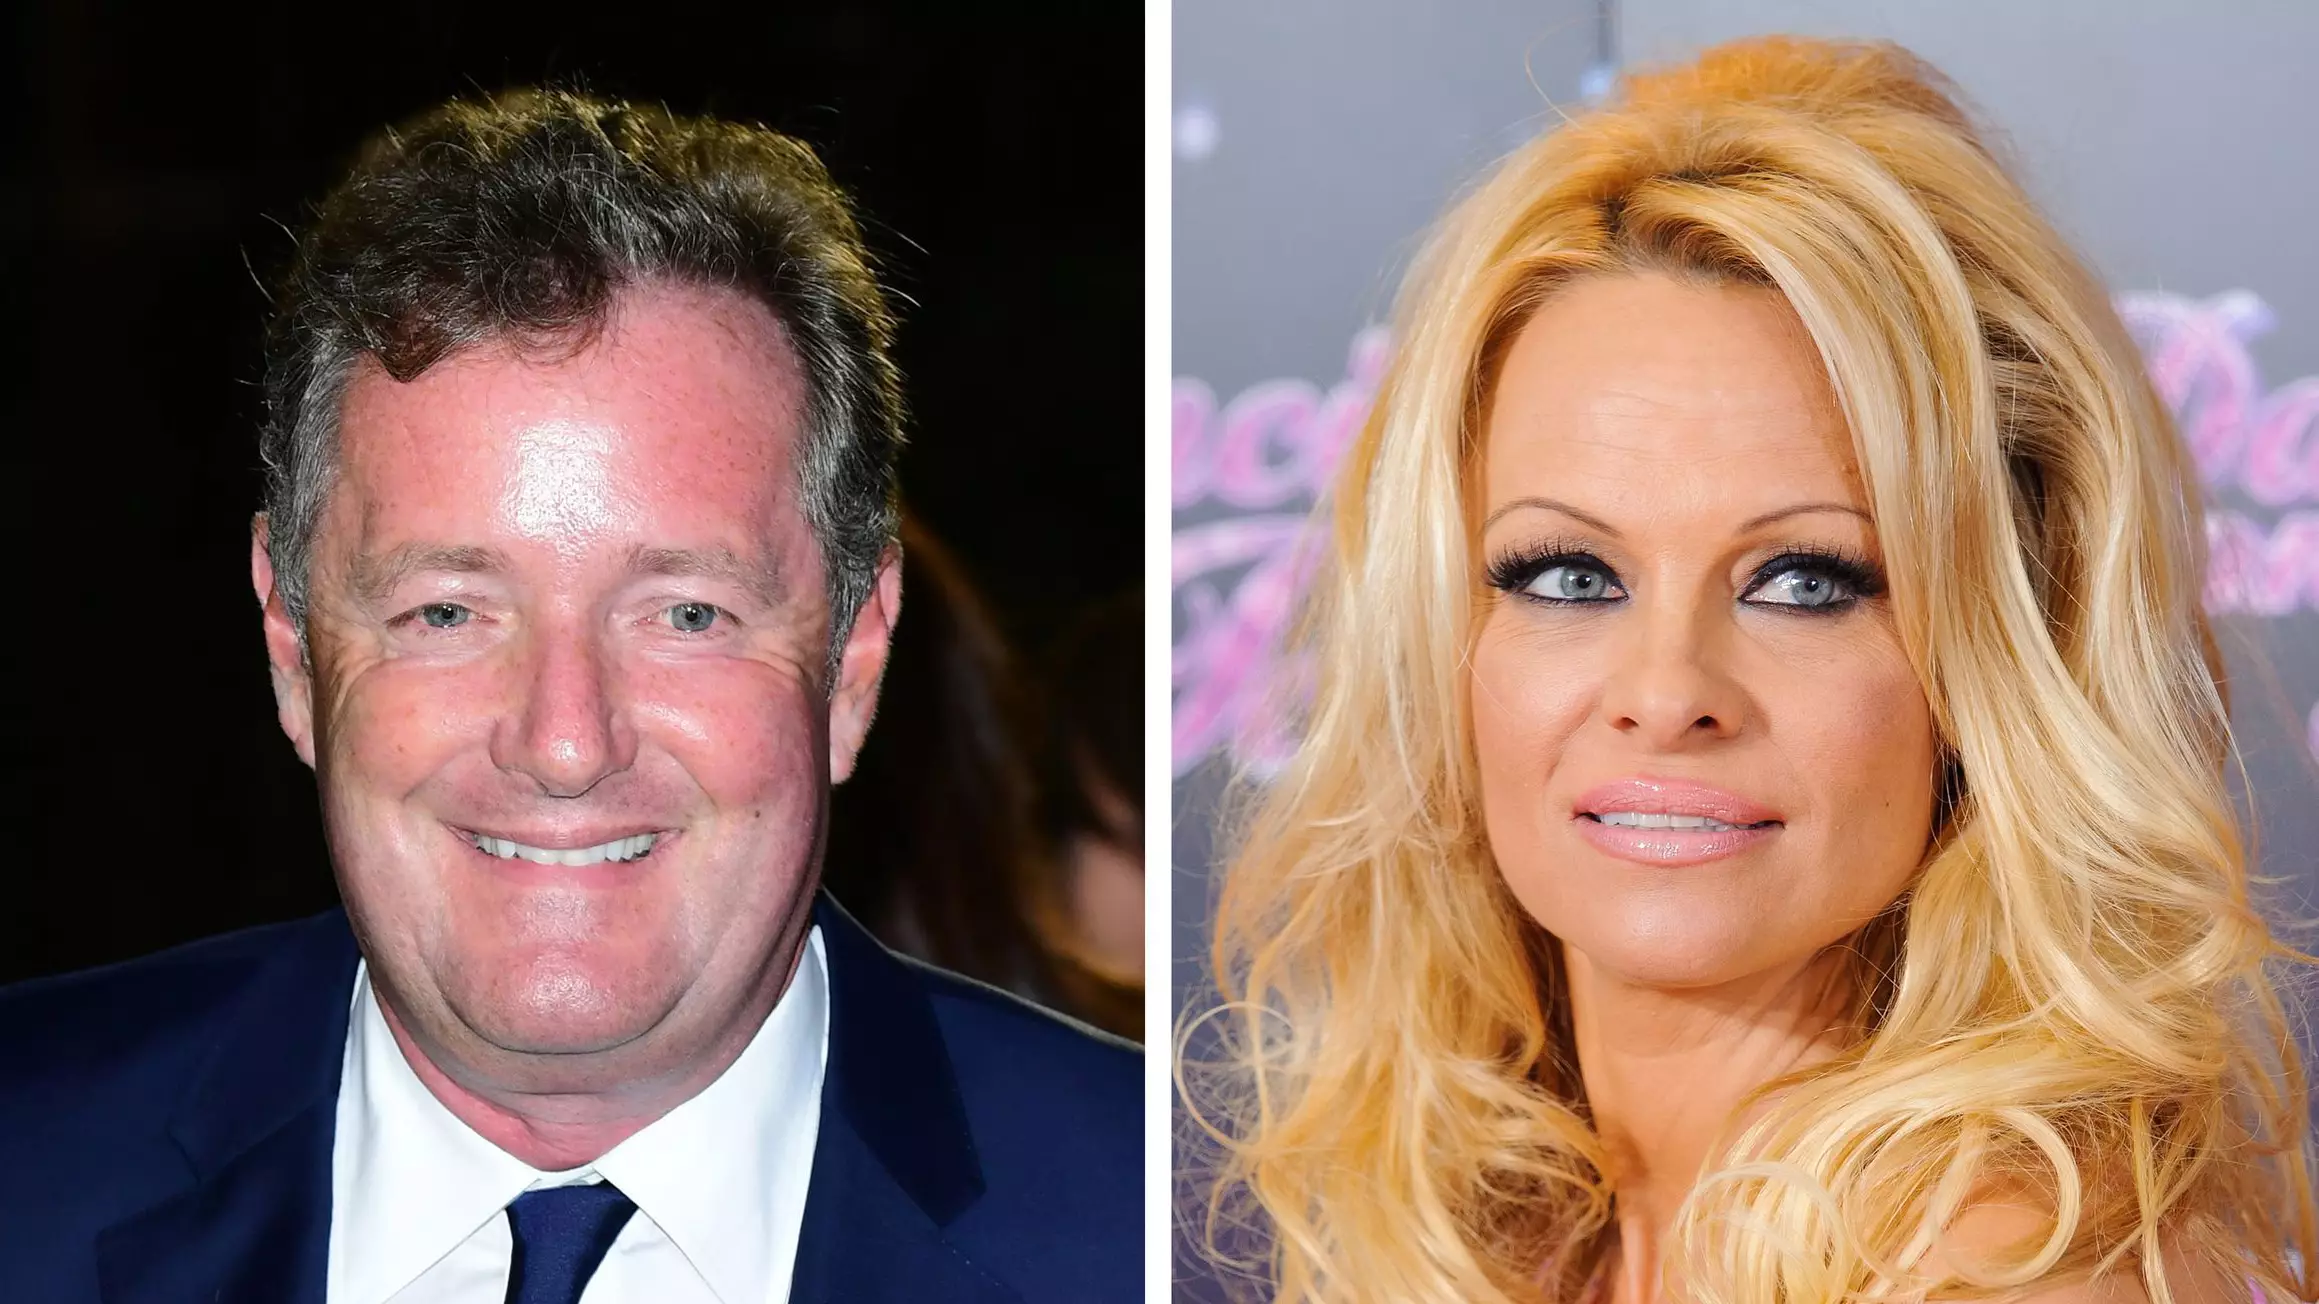 Piers Morgan And 'Baywatch' Star Pamela Anderson Argue About 'Life Stories' Interview